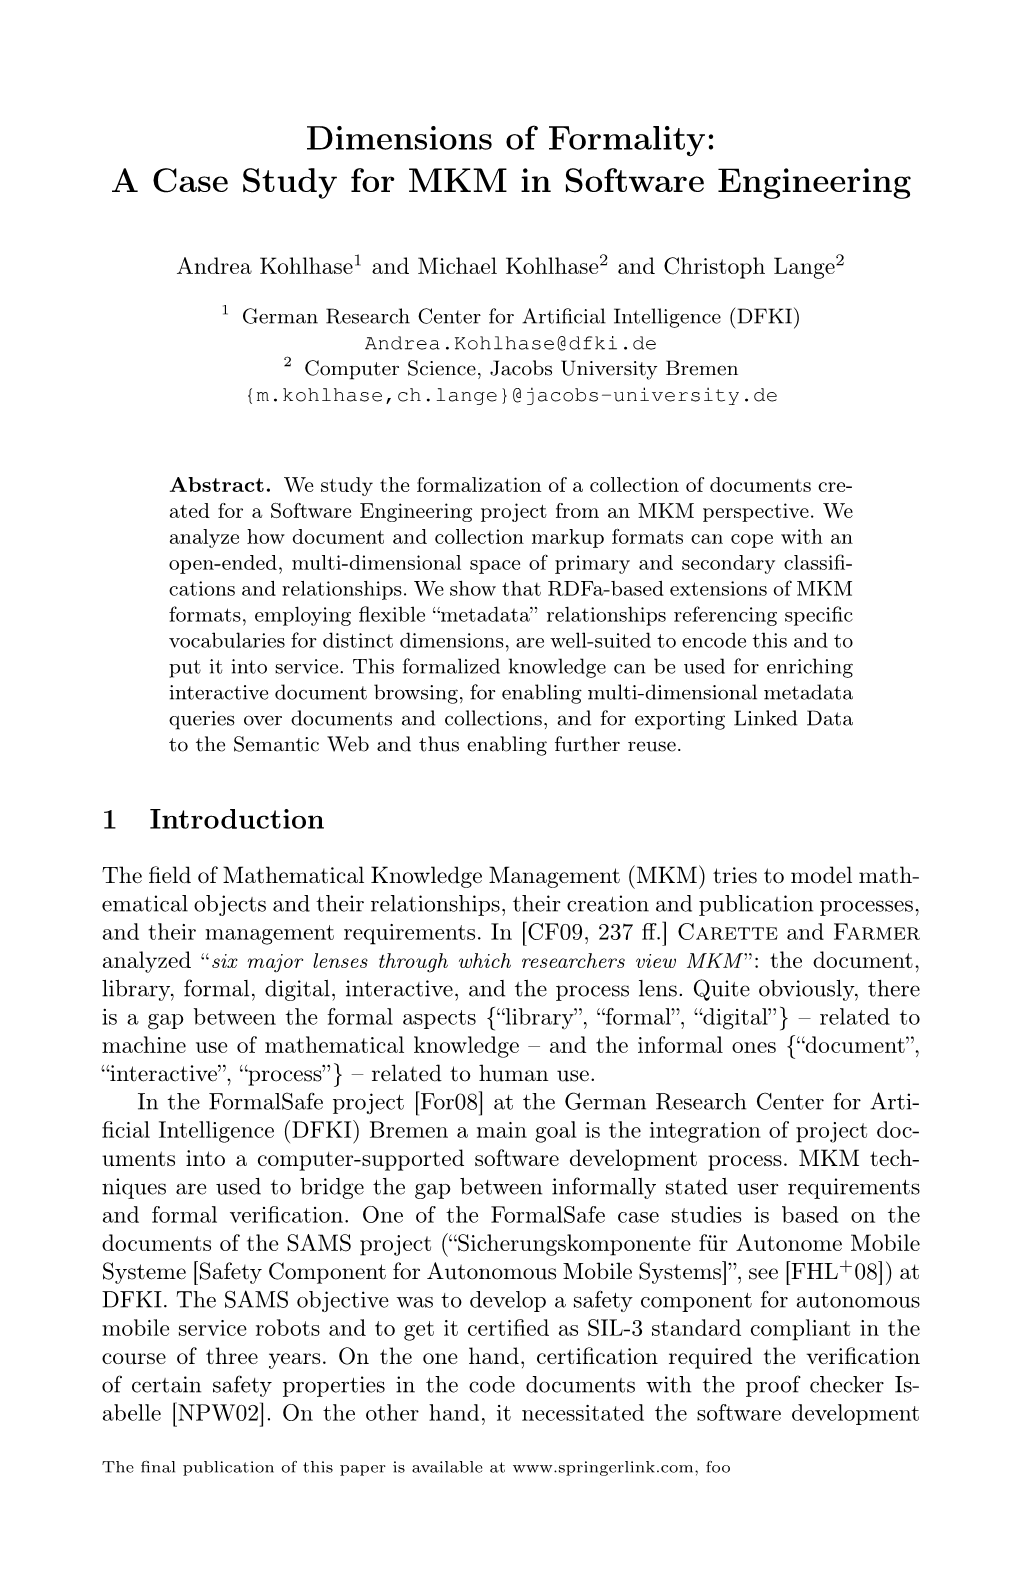 Arxiv:1004.5071V1 [Cs.DL] 28 Apr 2010 Systeme [Safety Component for Autonomous Mobile Systems]”, See [FHL 08]) at DFKI